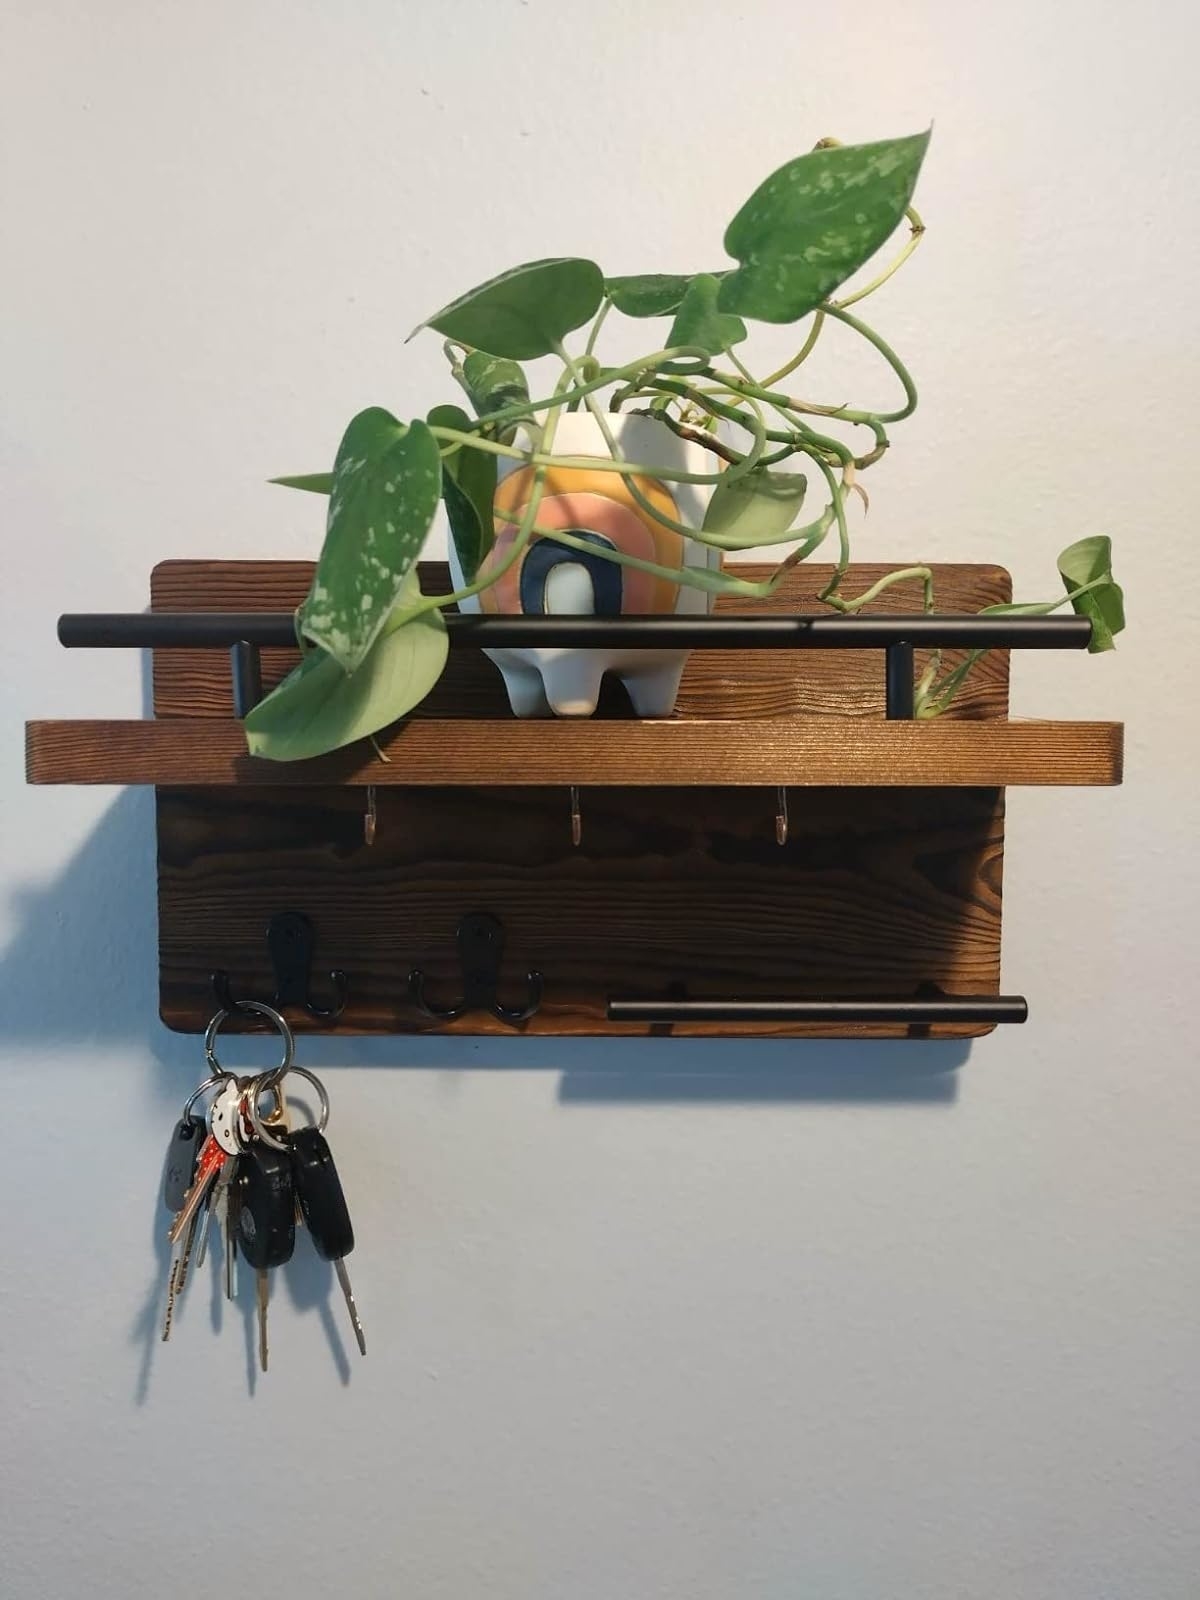 Reviewer image of the shelf with a plant and keys